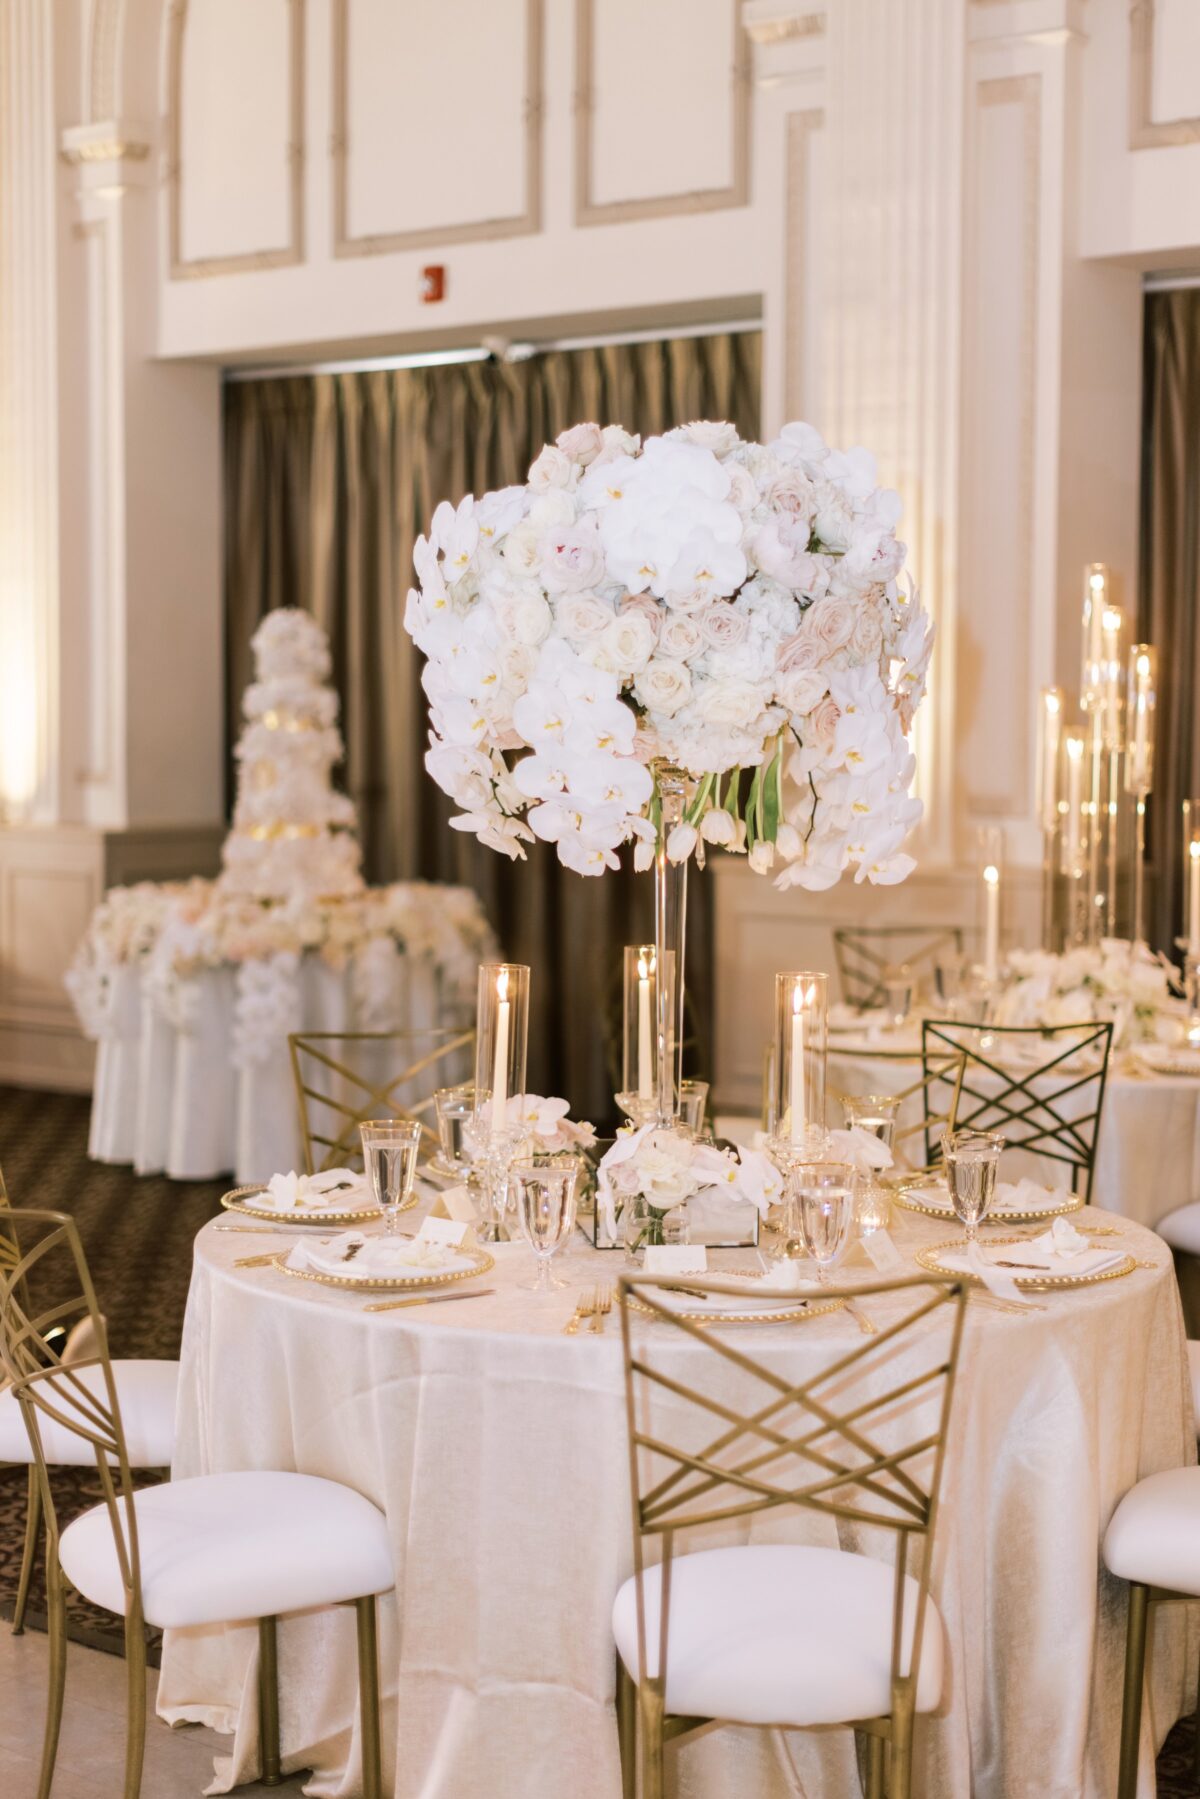 Neutral wedding tablescape - Photography: Brooke Images